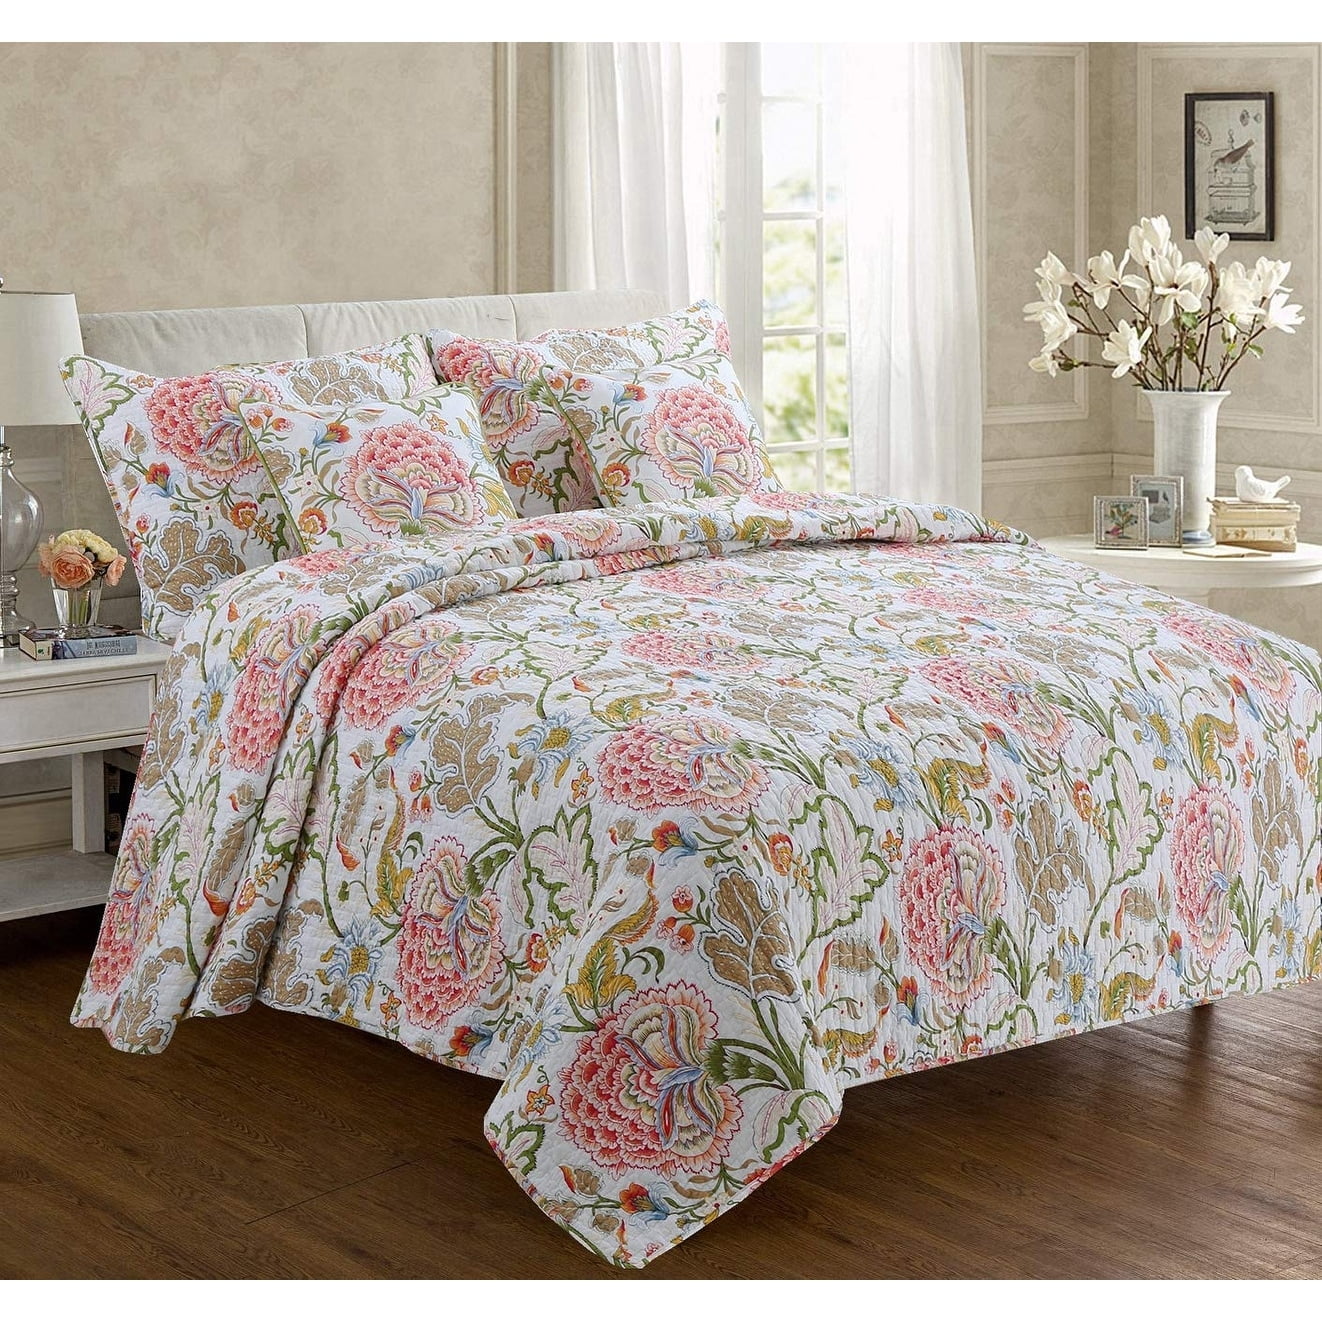 Details about   White Peacock Blanket Bedding Kantha Quilt Bedspread Throw Cotton bedcover sheet 